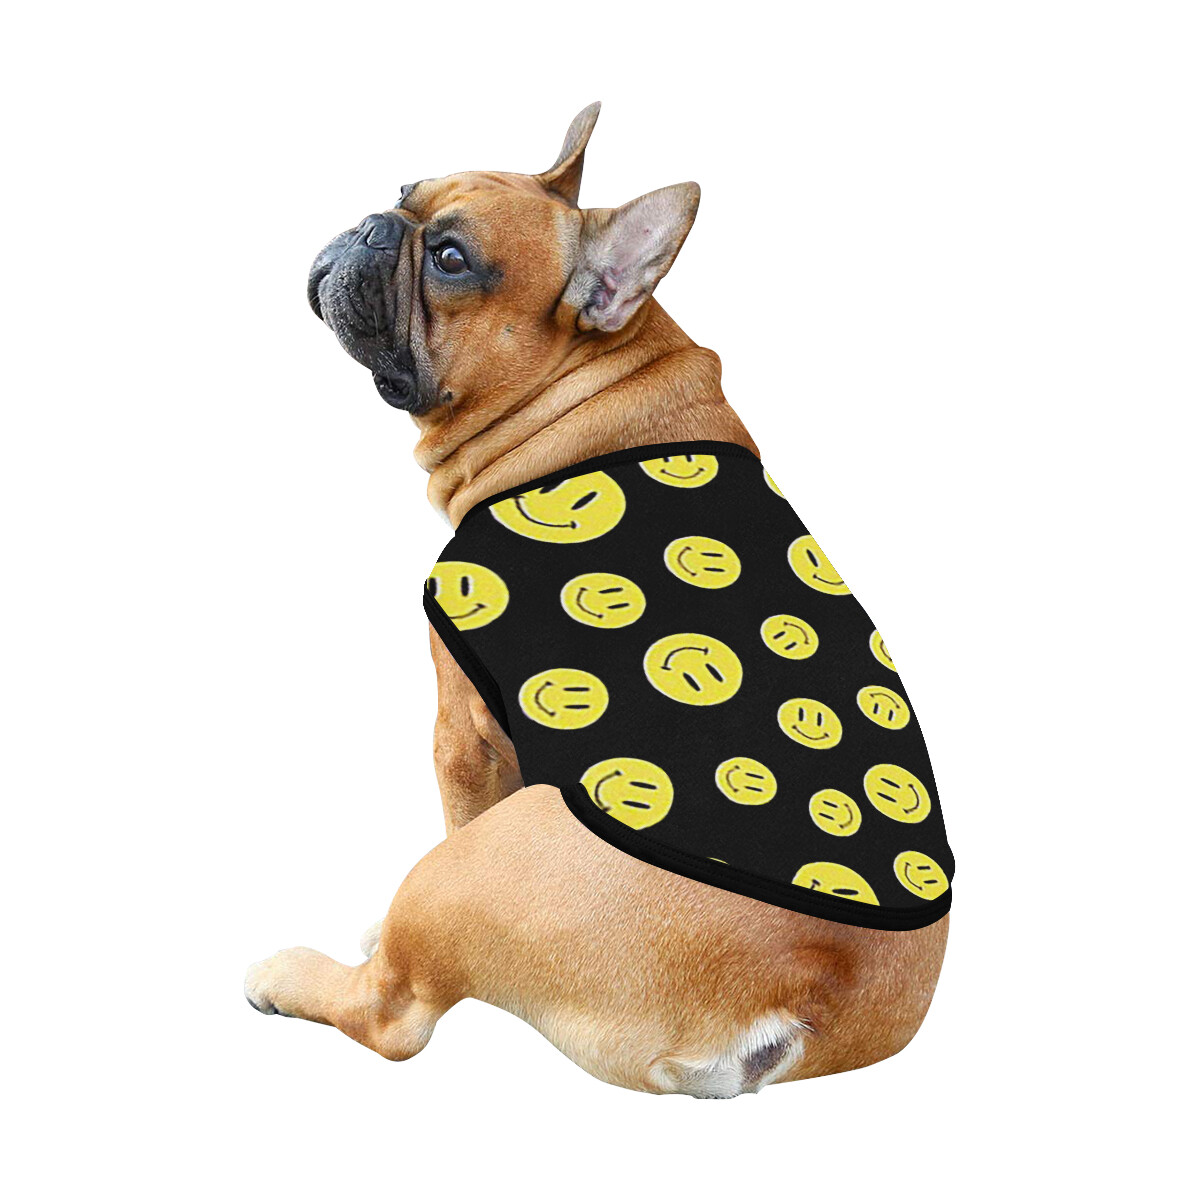 🐕 Happy faces Dog Tank Top, Dog shirt, Dog clothes, Gifts, front back print, 7 sizes XS to 3XL, dog t-shirt, dog t-shirt, dog gift, black